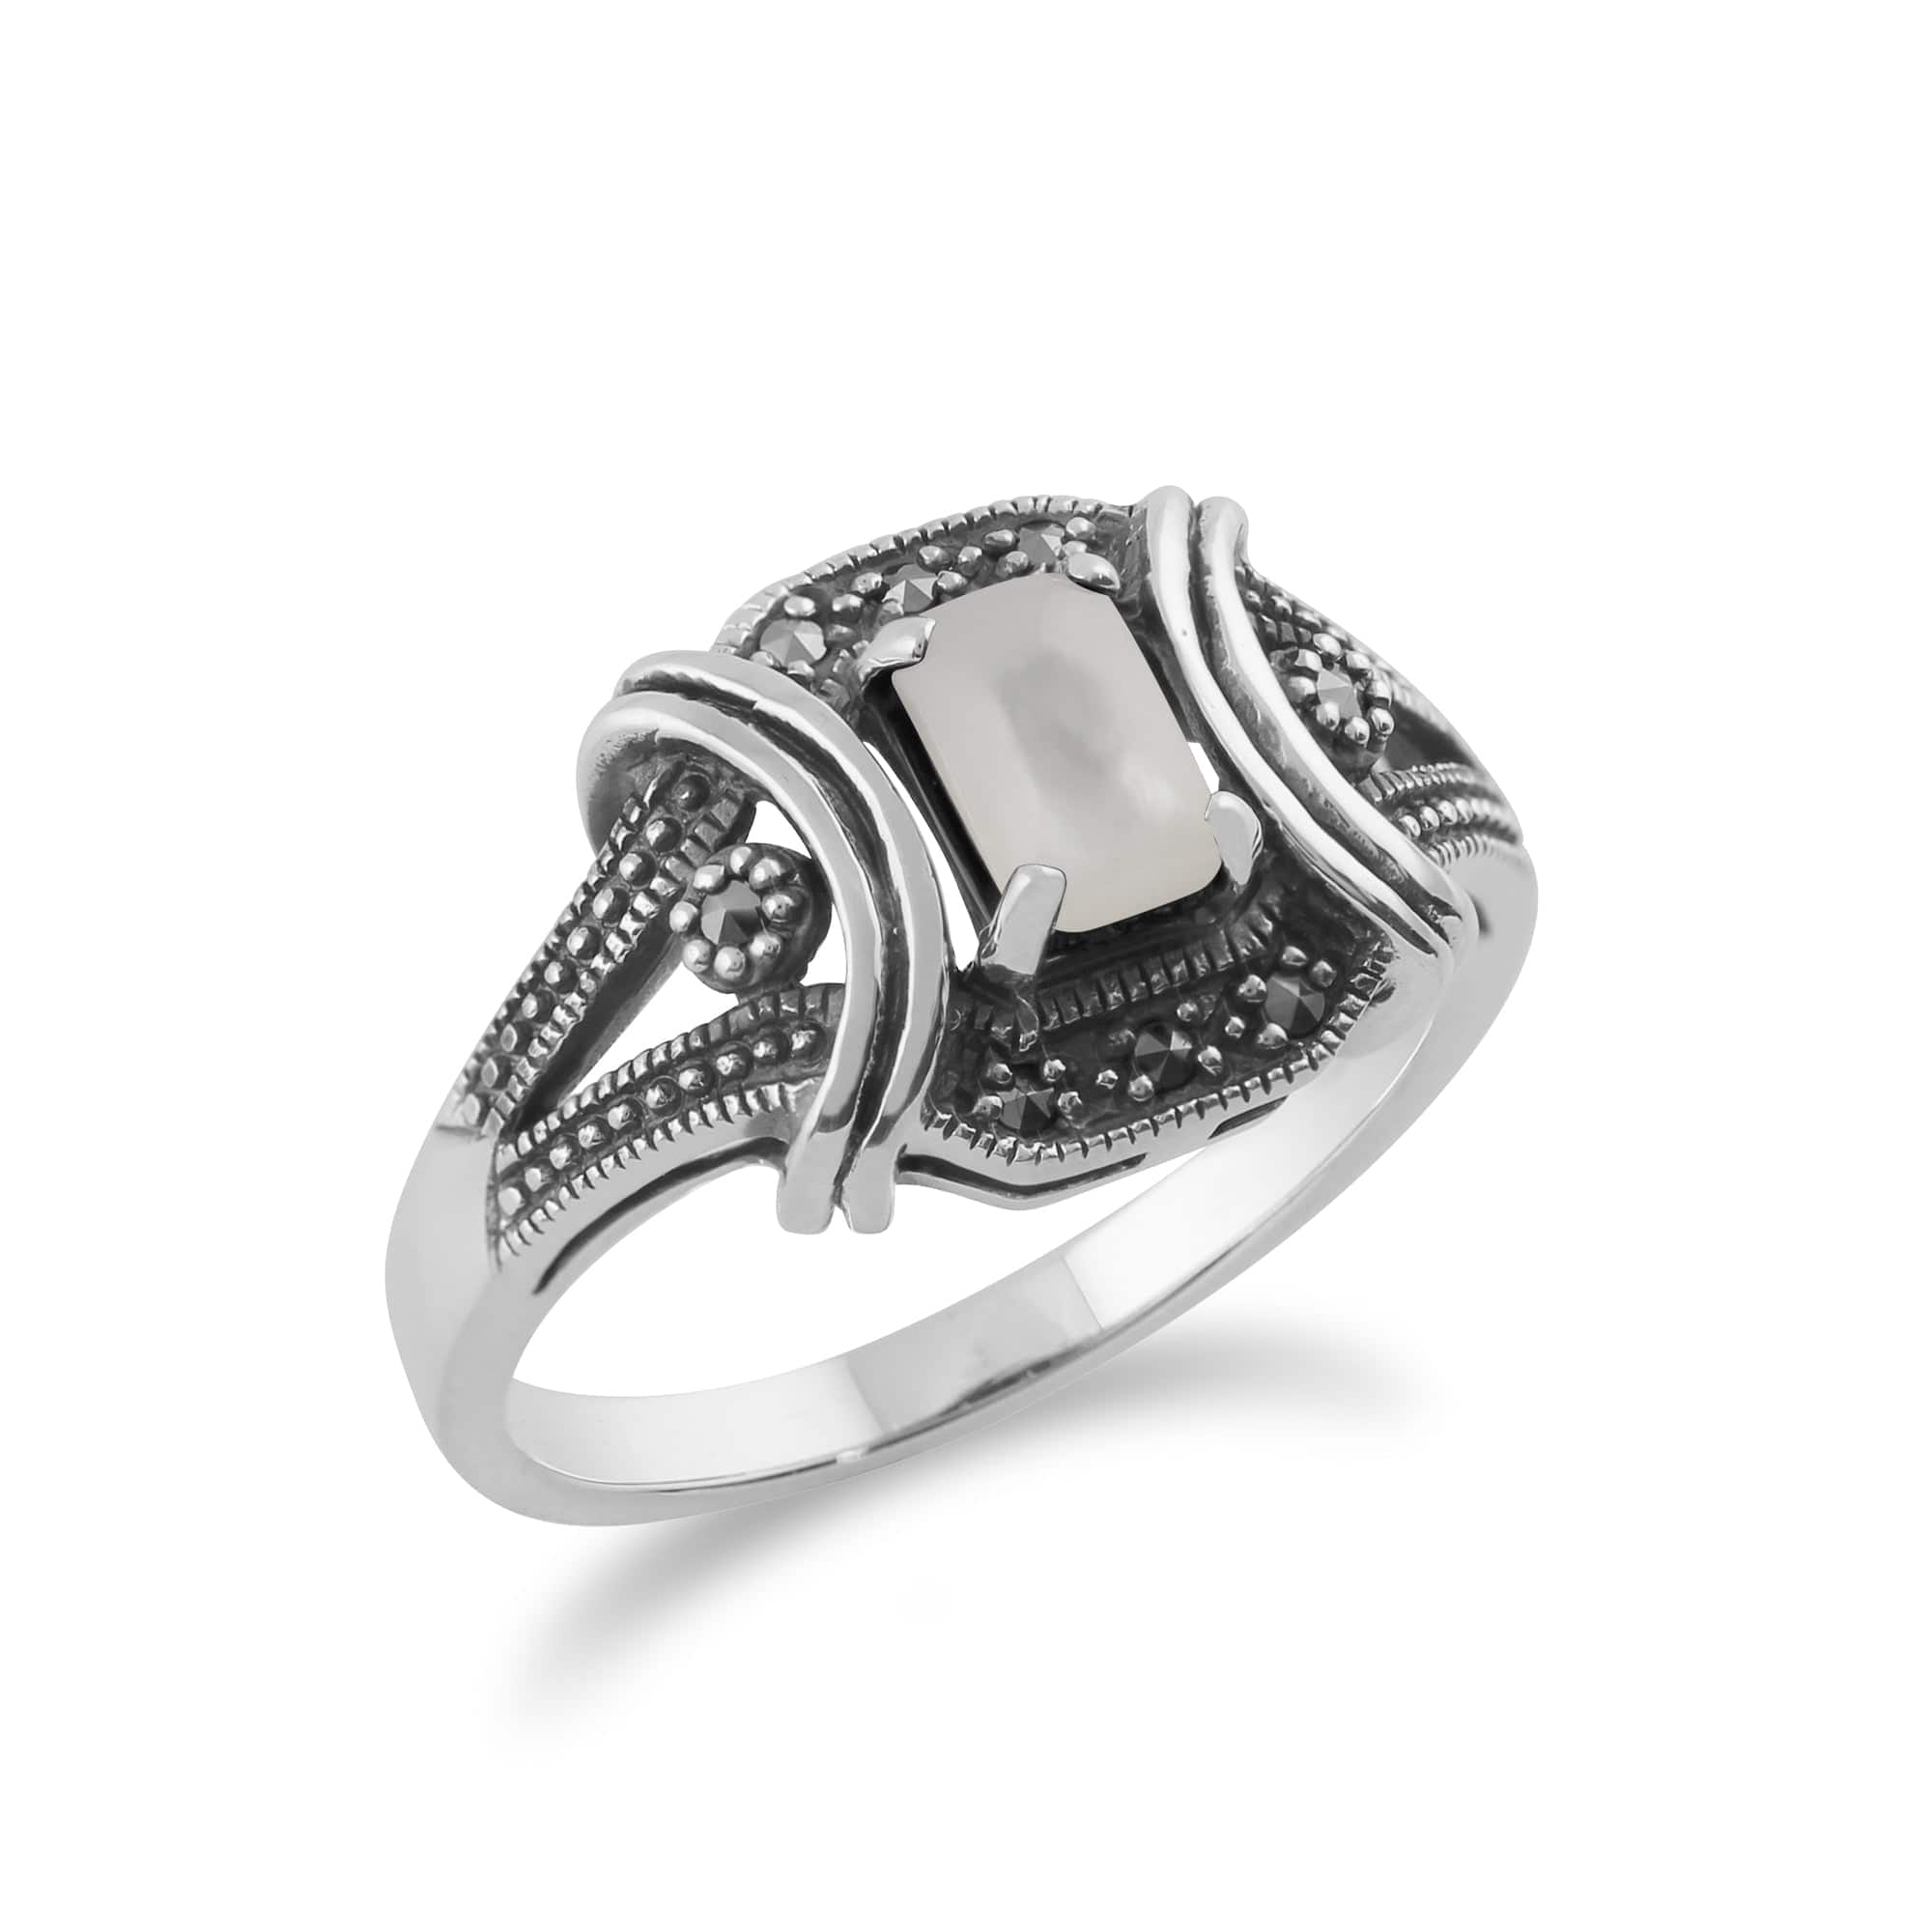 Art Deco Style Mother of Pearl Cabochon & Marcasite Ring in 925 Sterling Silver - Gemondo